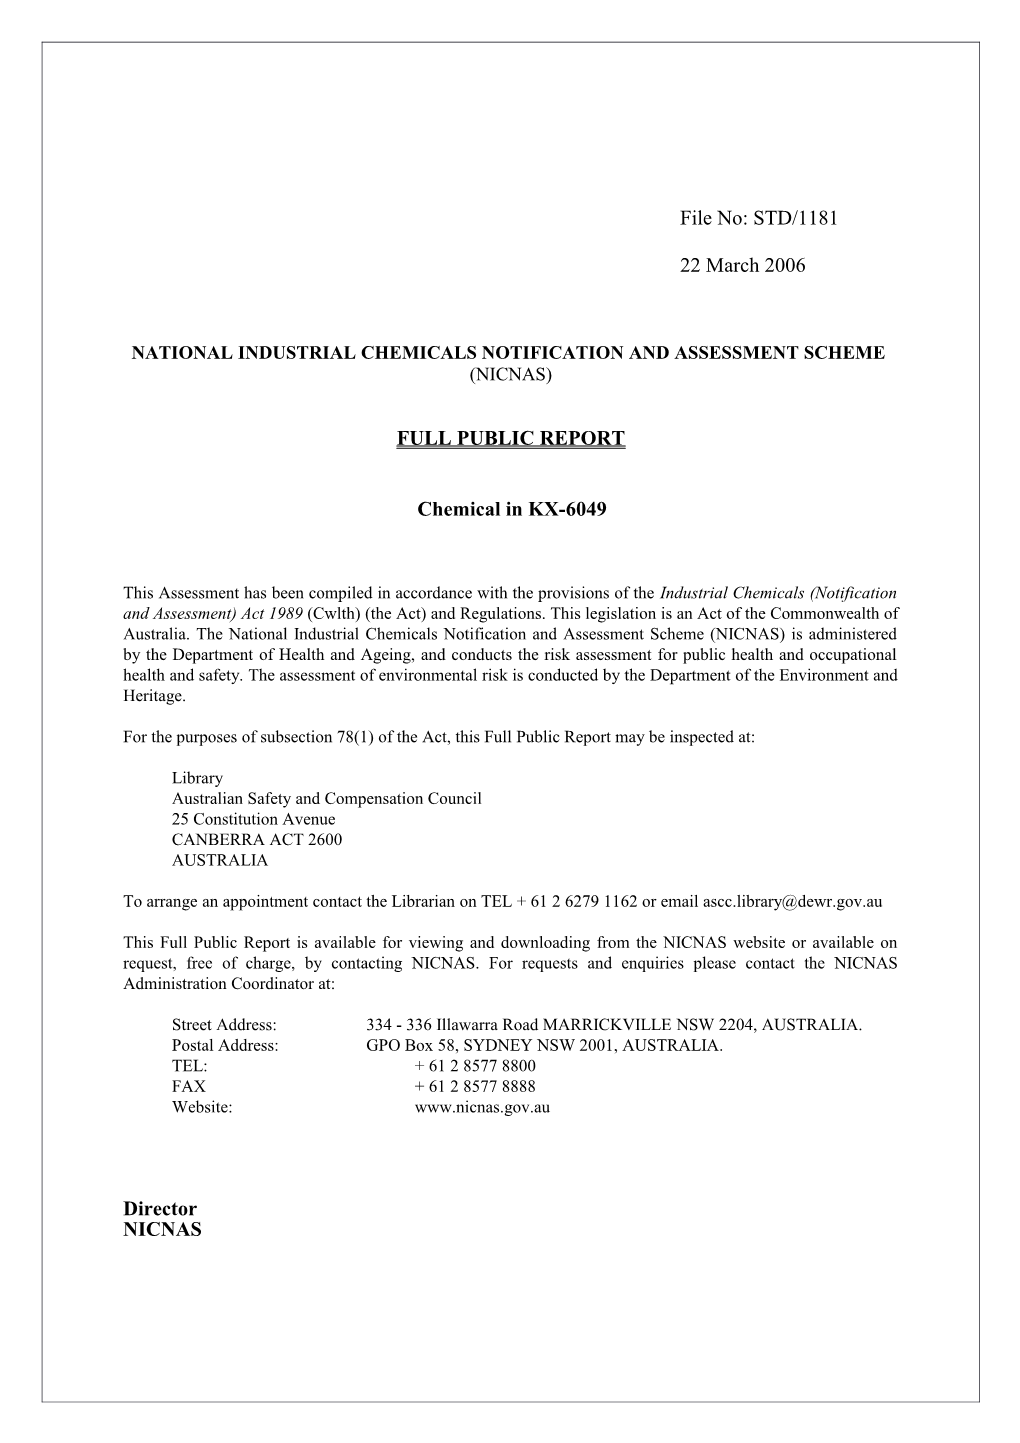 National Industrial Chemicals Notification and Assessment Scheme s30